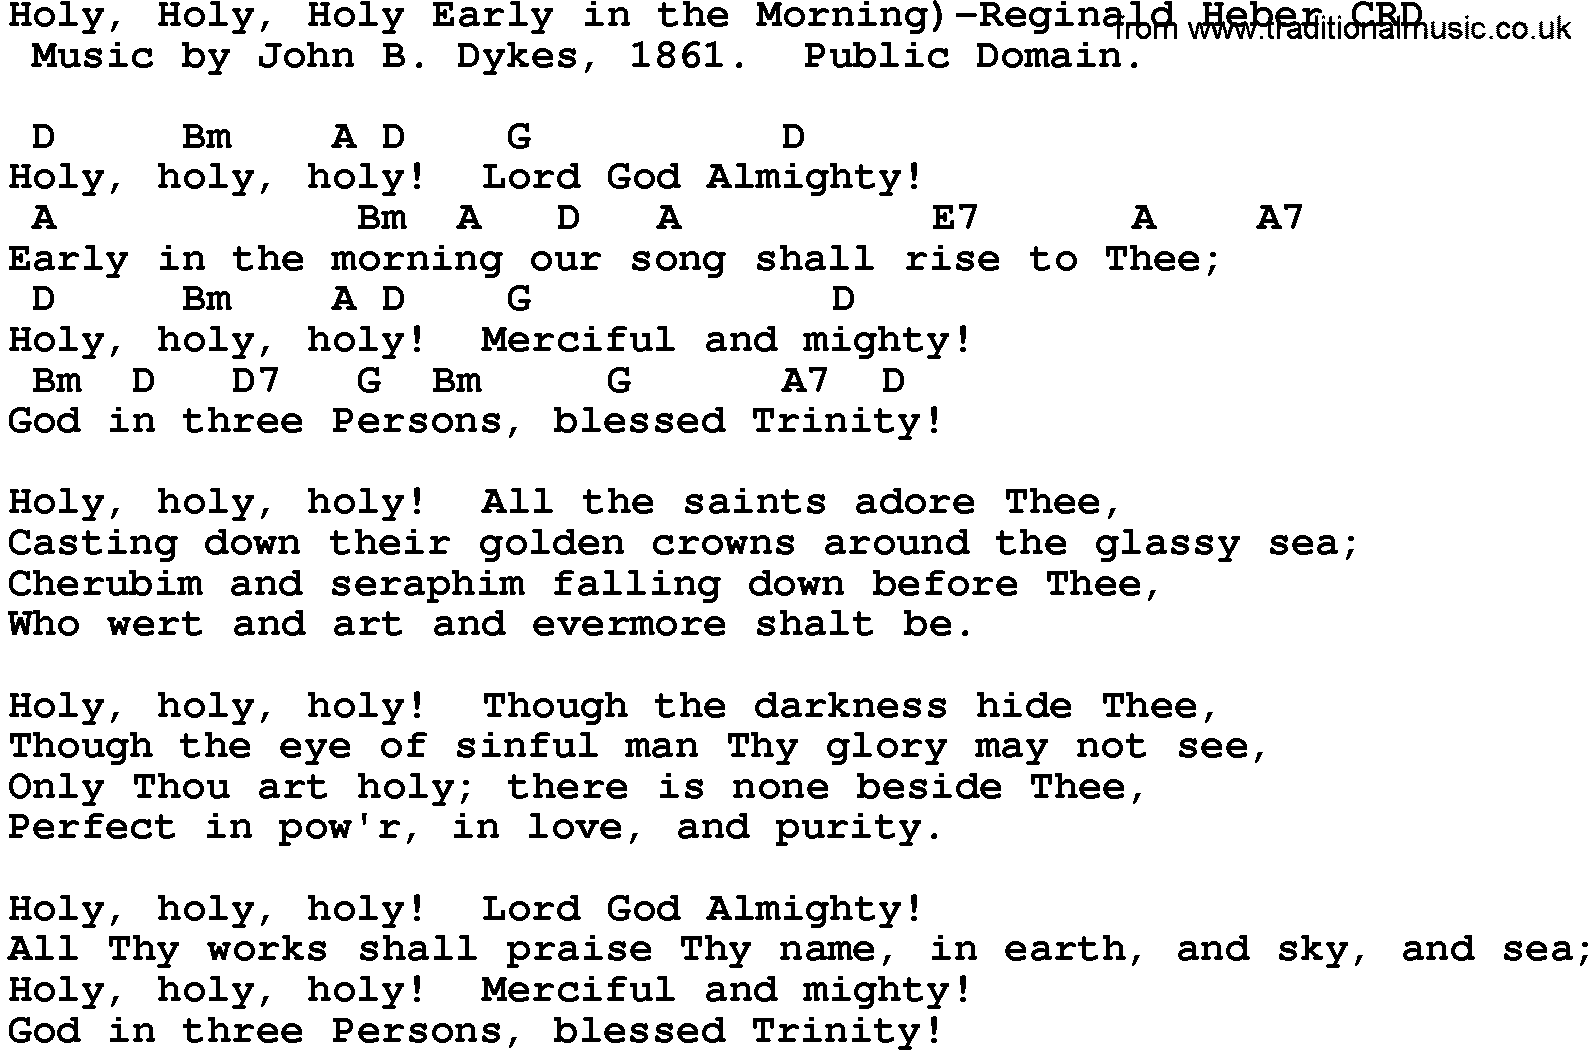 Gospel Song: Holy, Holy, Holy Early In The Morning)-Reginald Heber, lyrics and chords.